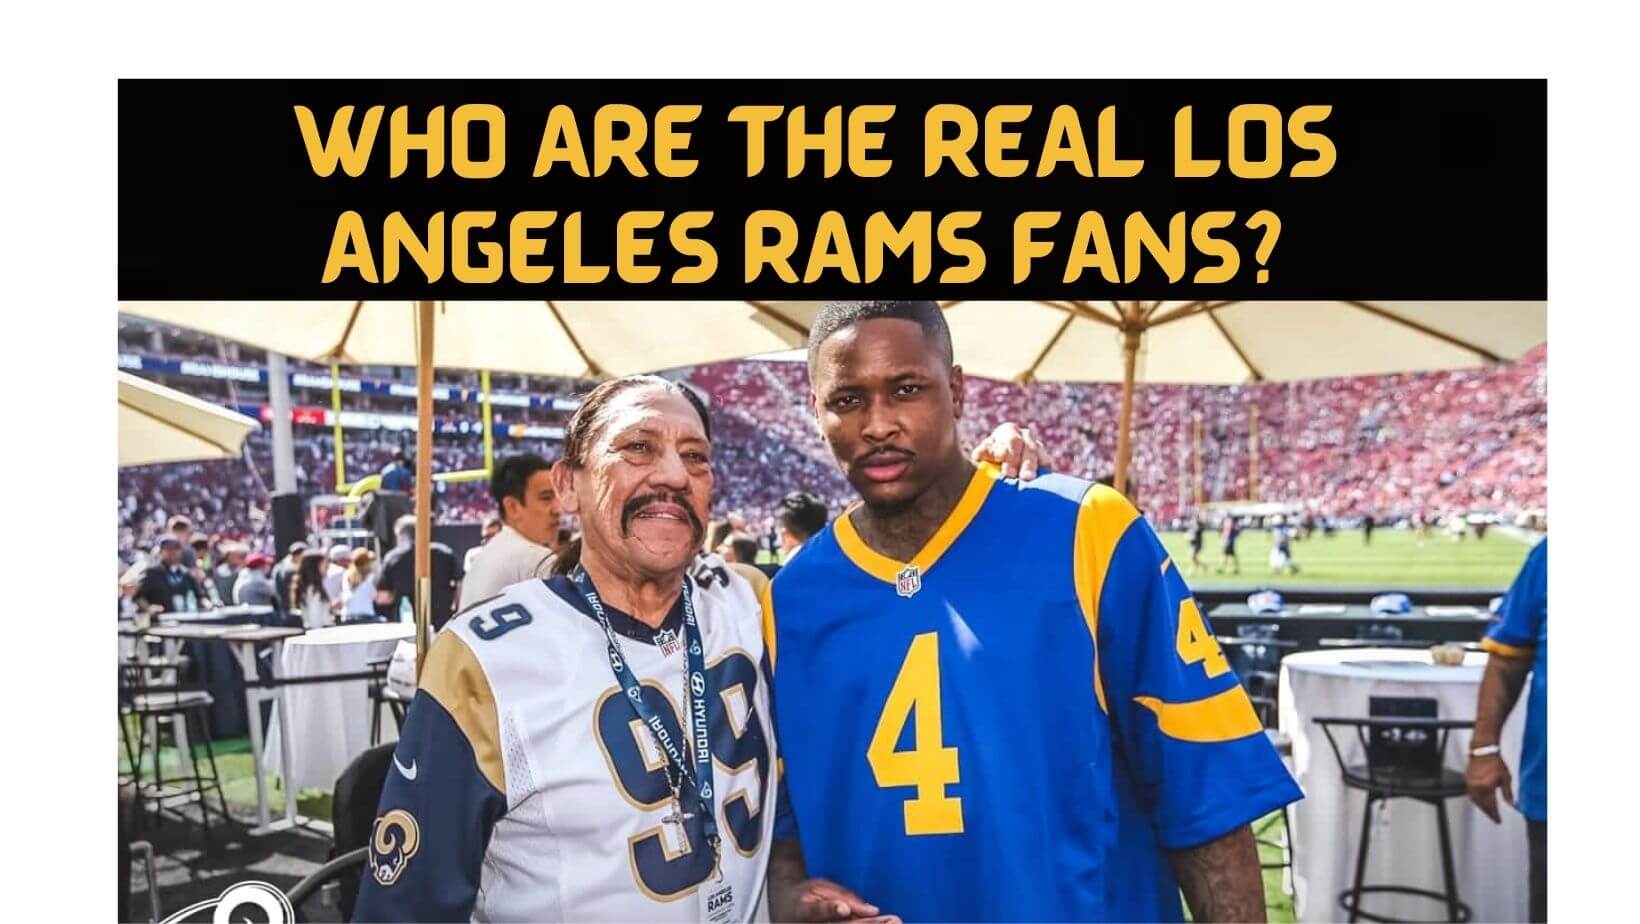 WHO ARE THE REAL LOS ANGELES RAMS FANS